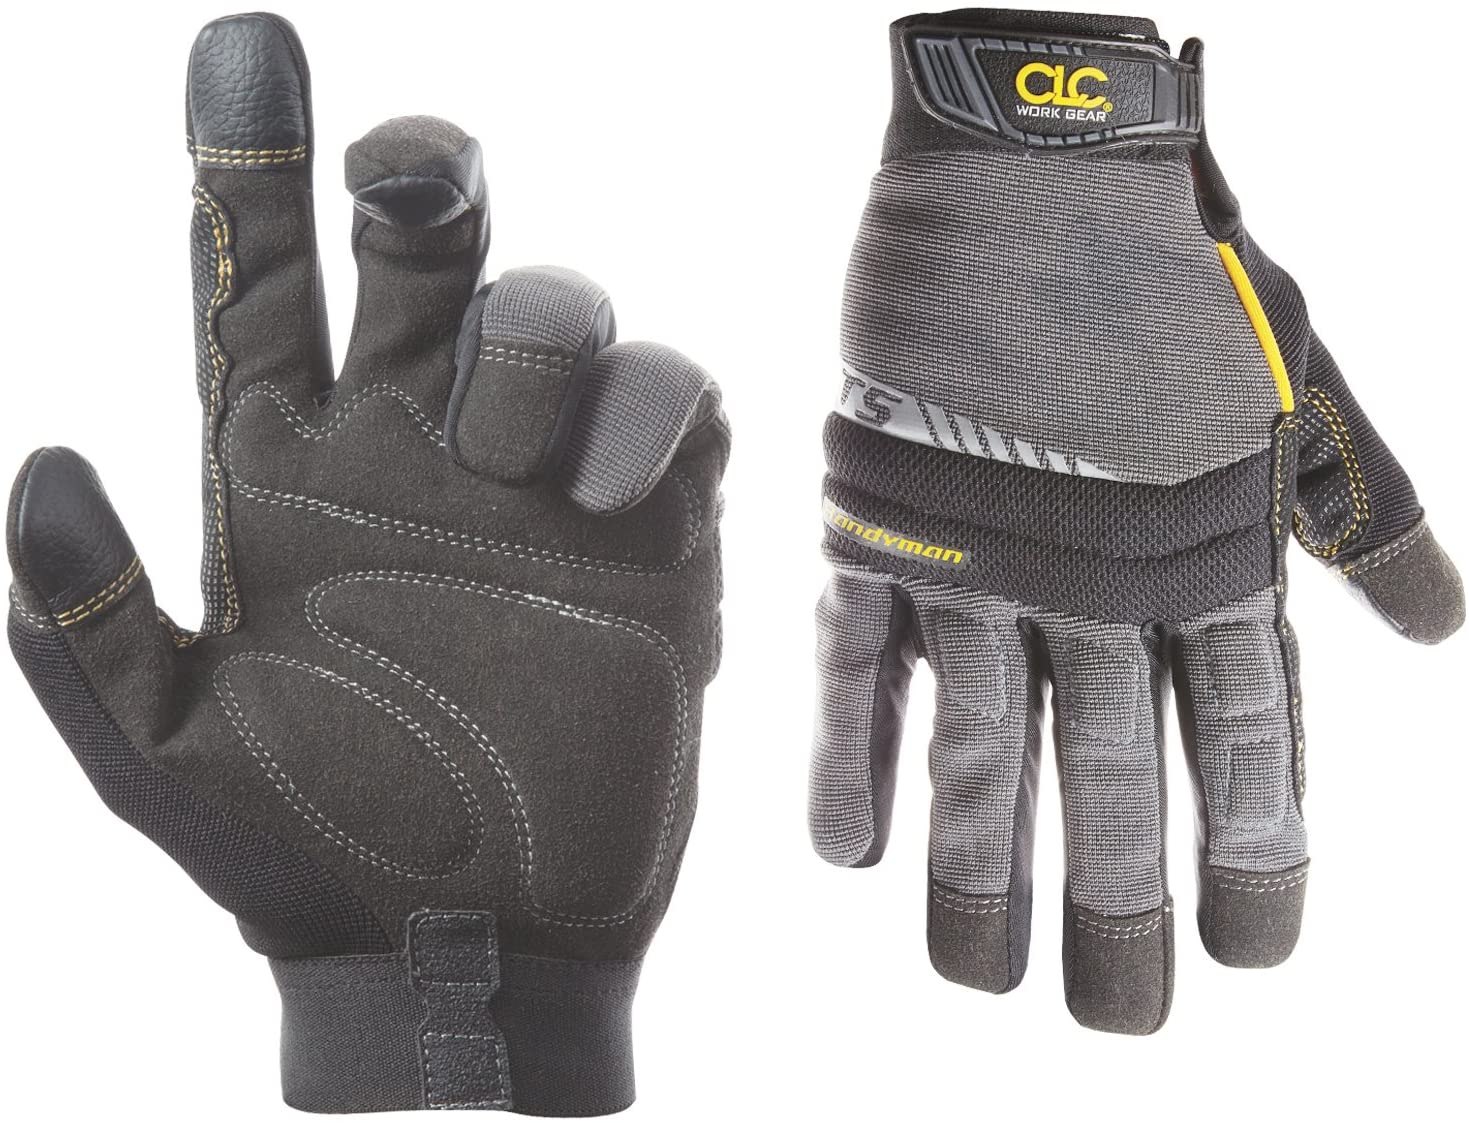 The Best Woodworking Gloves, Including Tactical and Light-Duty Work Gloves